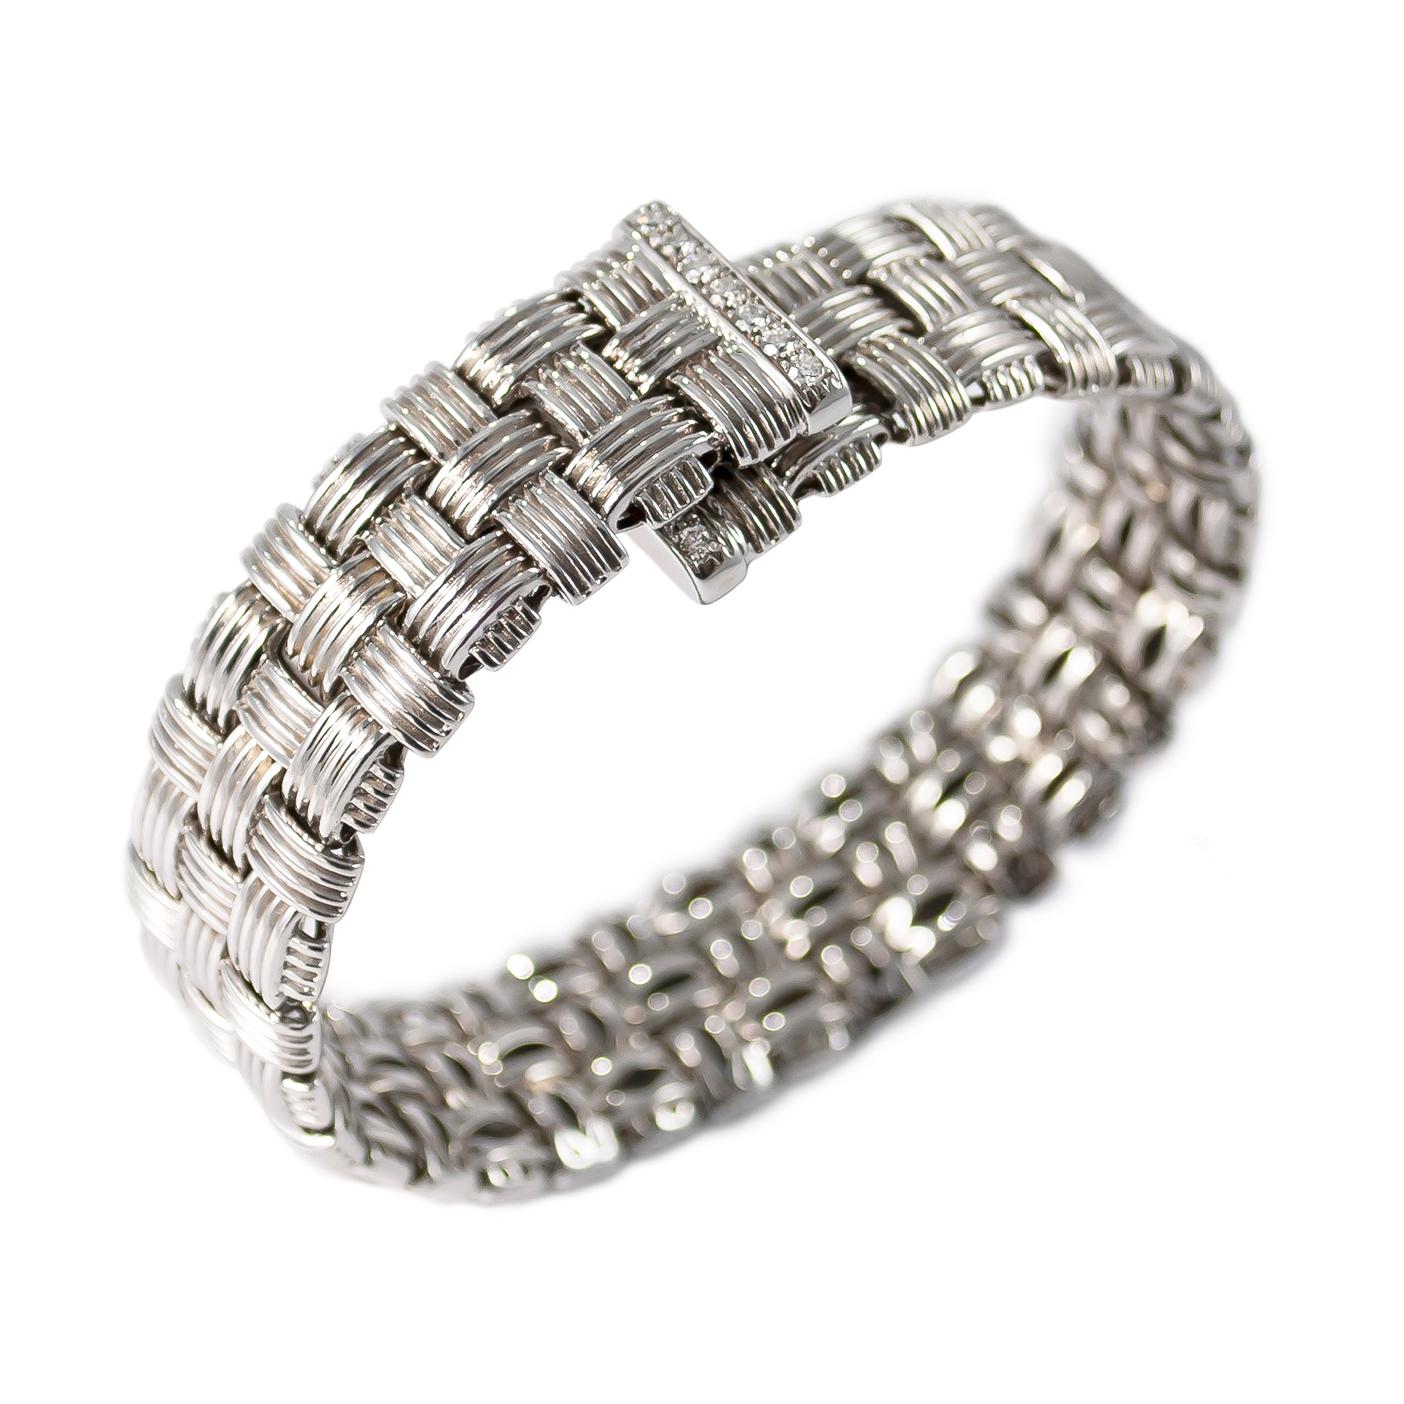 This iconic bracelet from the Roberto Coin Appassionata Collection is made in 18K White Gold with diamond pavé accents, and the interior is set with a signature red ruby detail inherent to the Italian designer. Flexible movement allows you to style